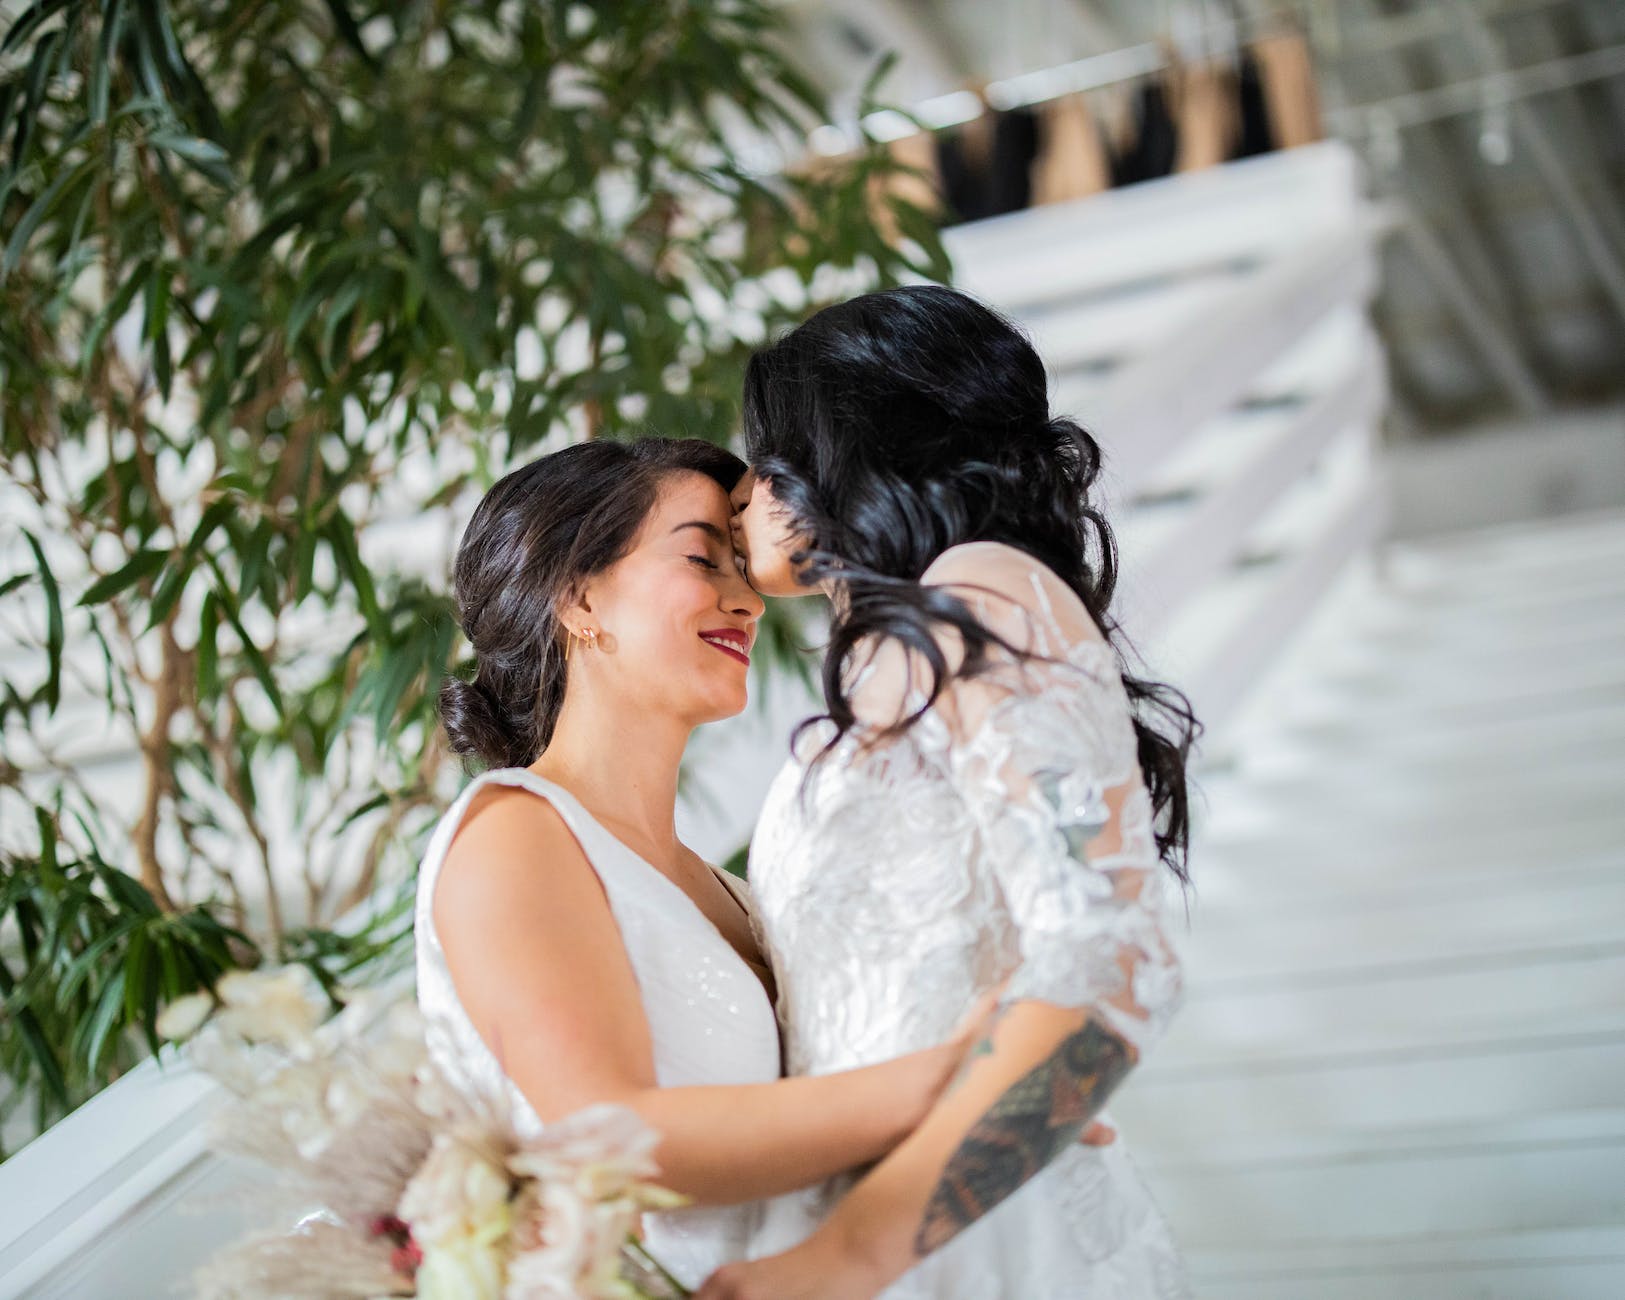 woman in white floral dress kissing woman in white dress